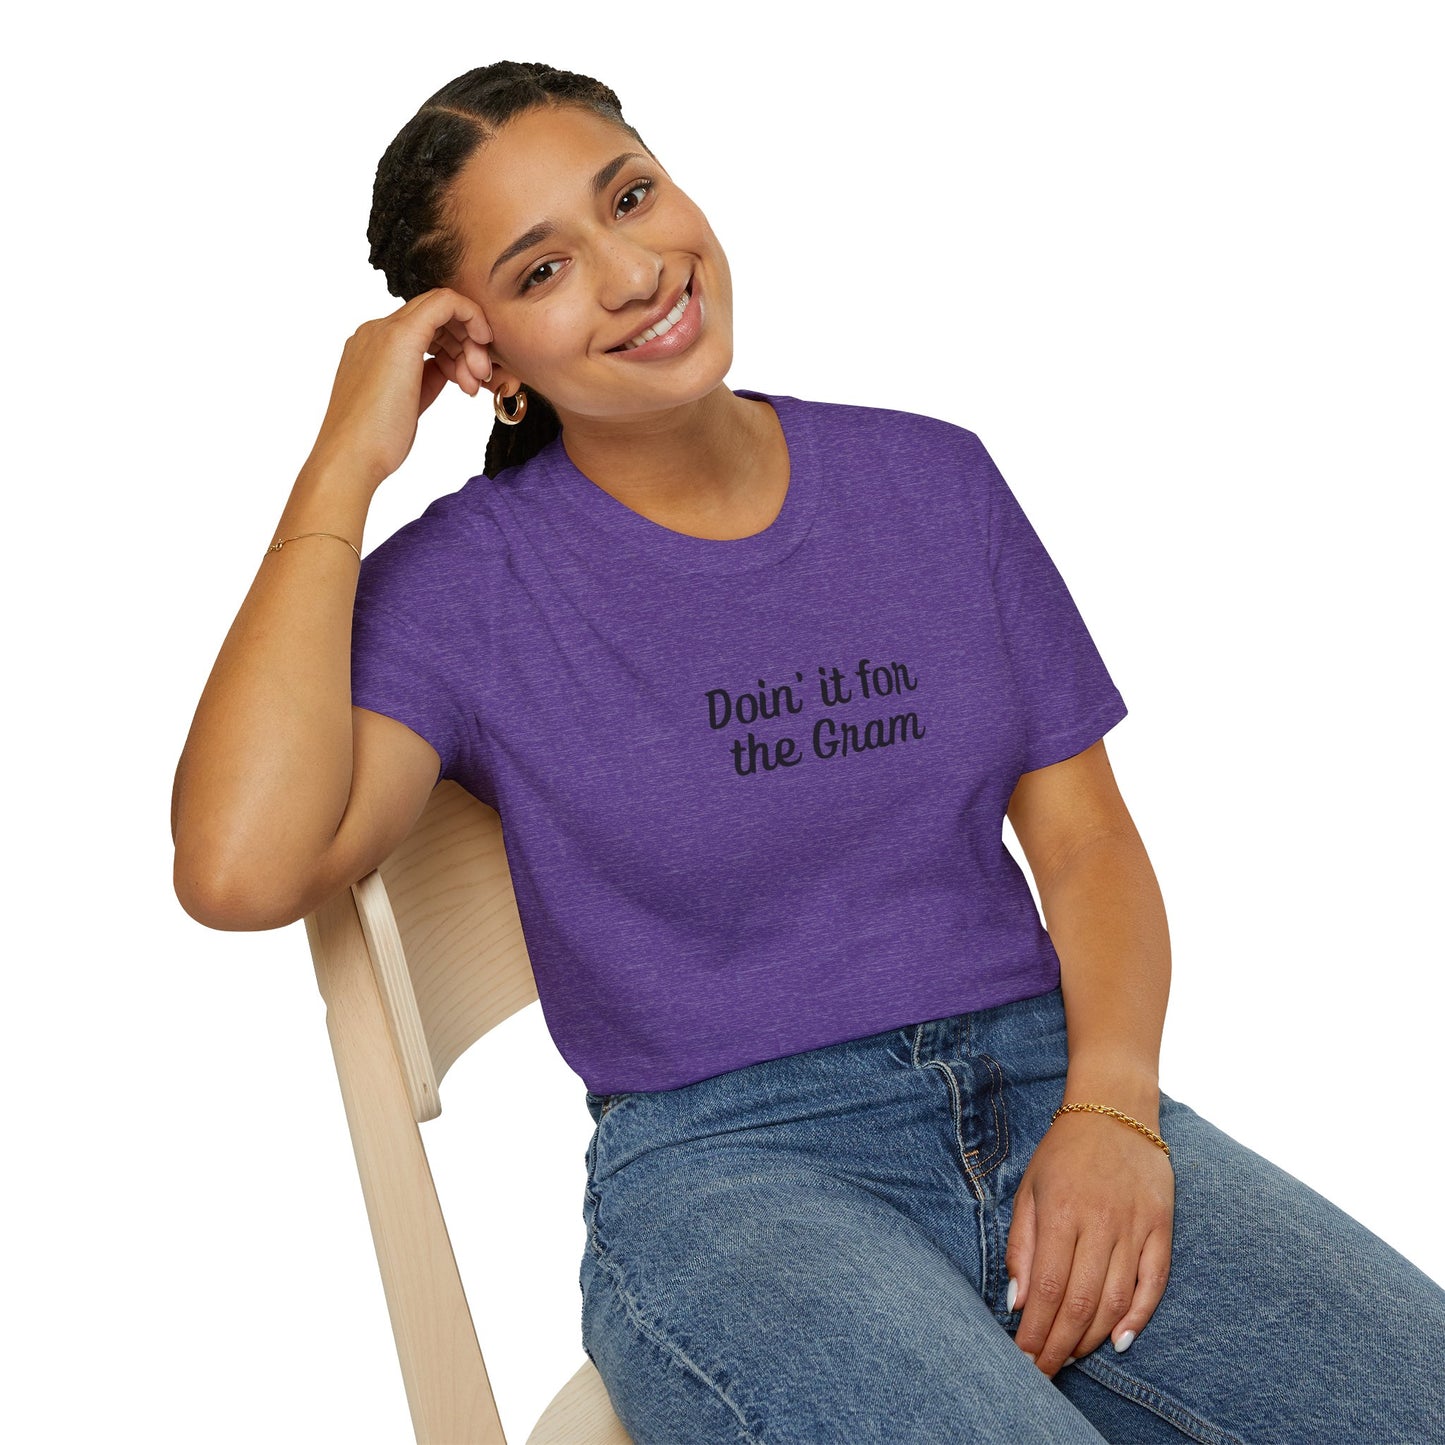 Doin' it for the Gram Influencer Women's Plus Short Sleeve Softstyle T-Shirt Sizes xl-5xl